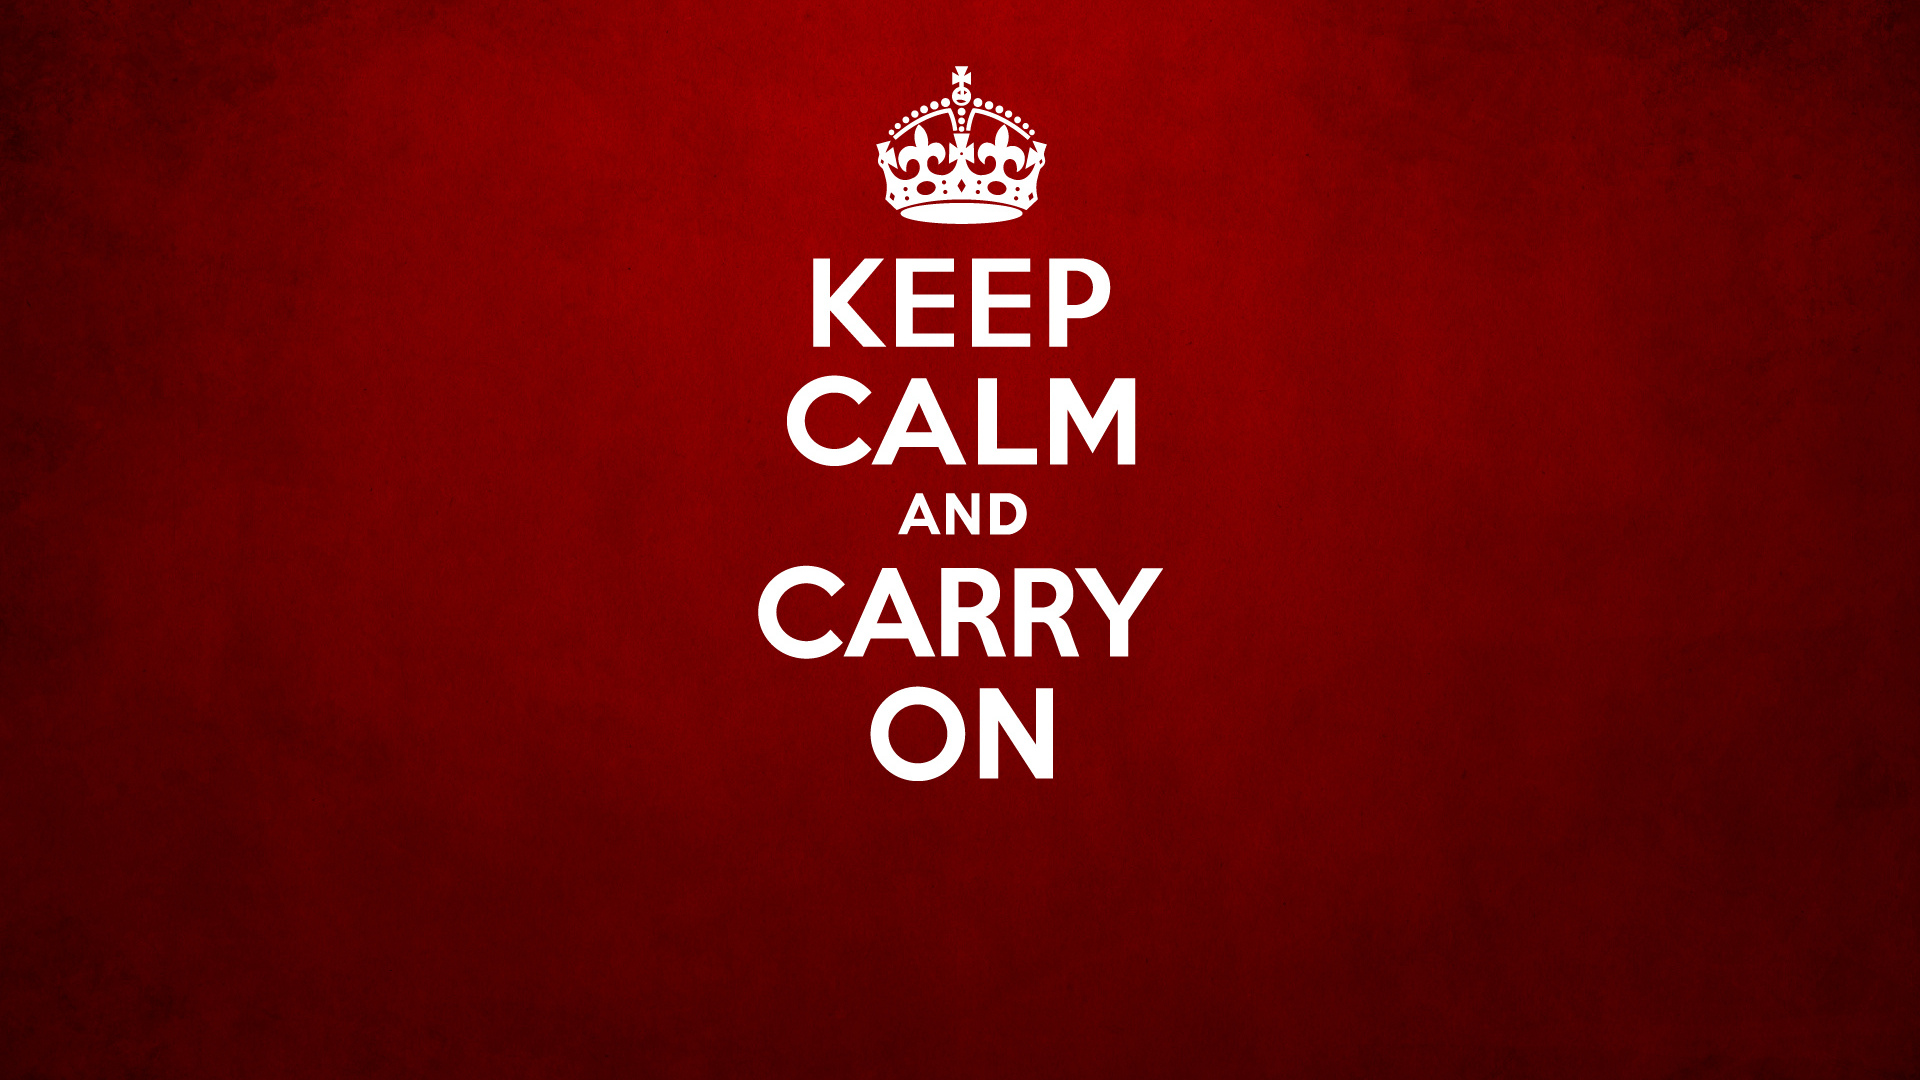 Keep calm hd wallpapers backgrounds